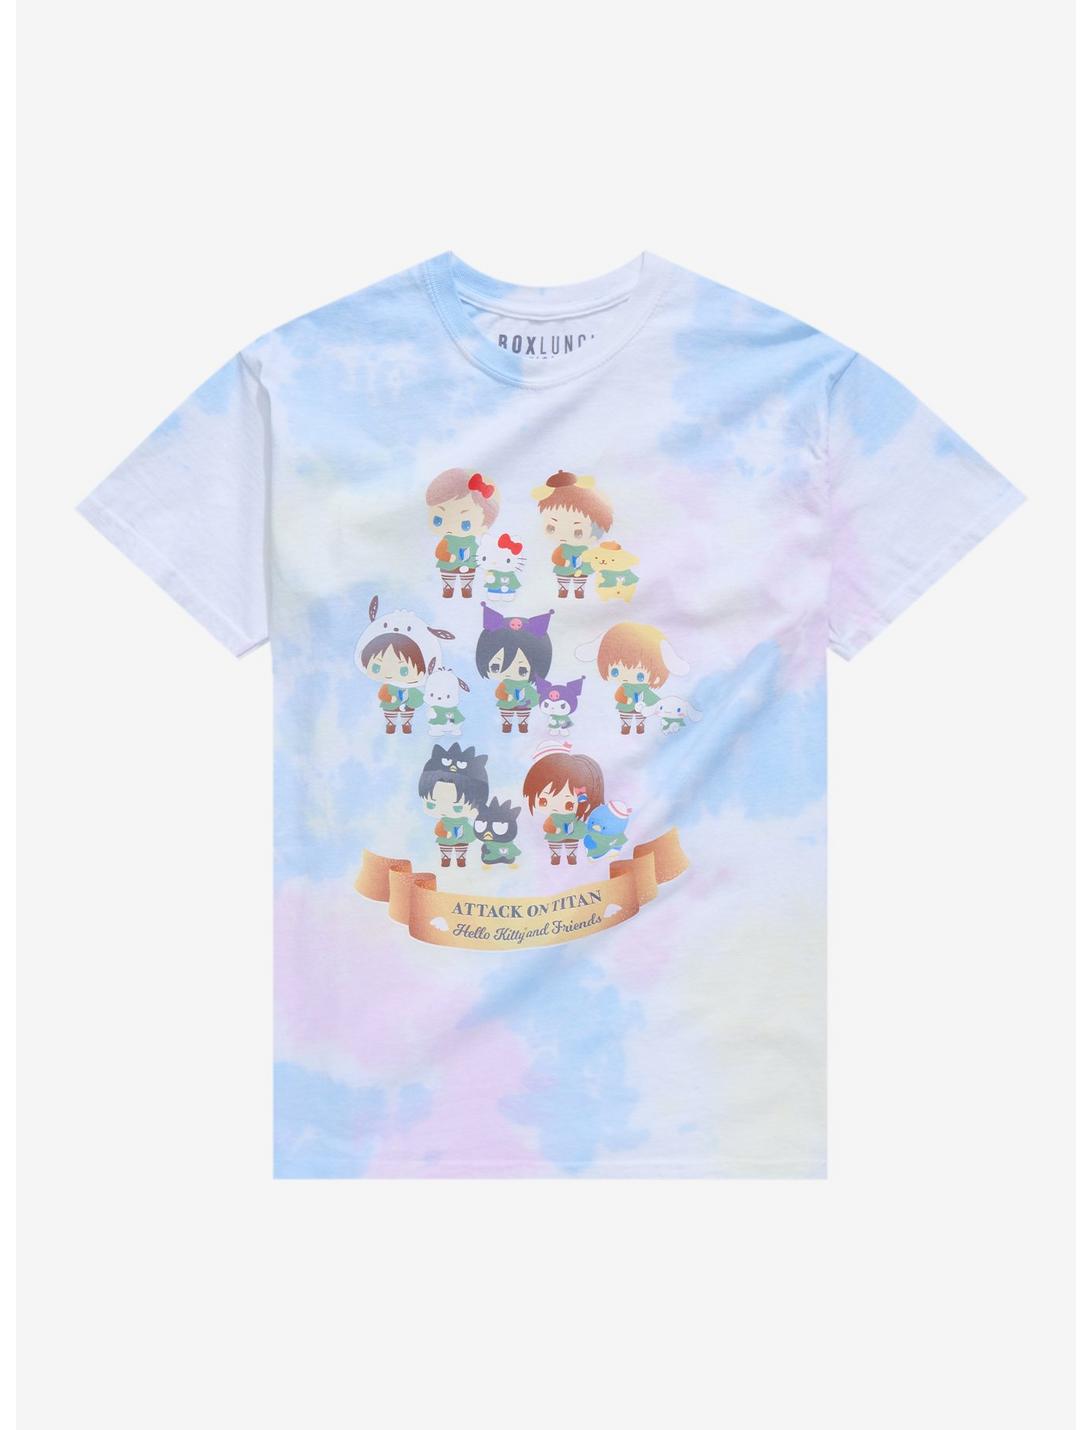 Sanrio Hello Kitty and Friends x Attack on Titan Tie-Dye T-Shirt - BoxLunch Exclusive, MULTI, hi-res